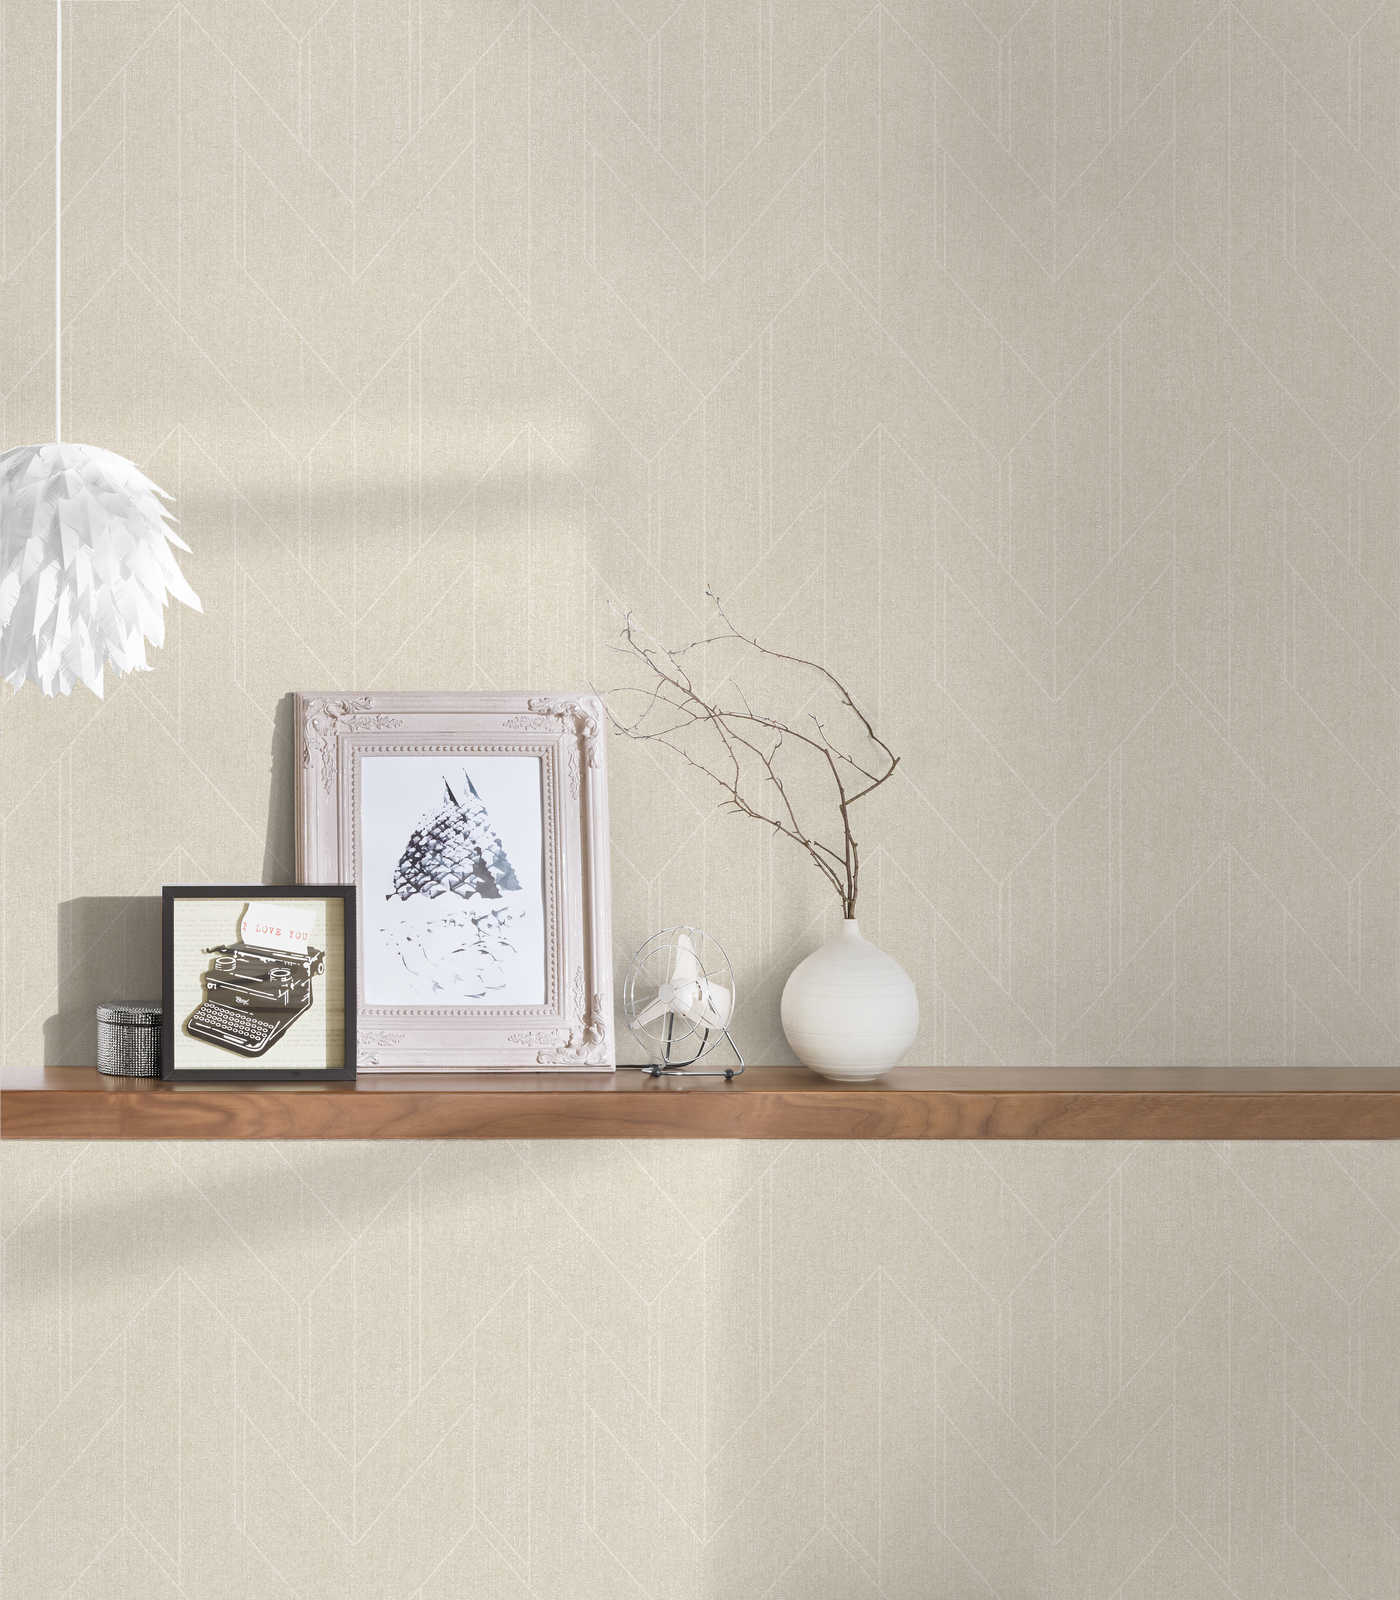             Non-woven wallpaper with shimmering gloss effect & graphic pattern - white
        